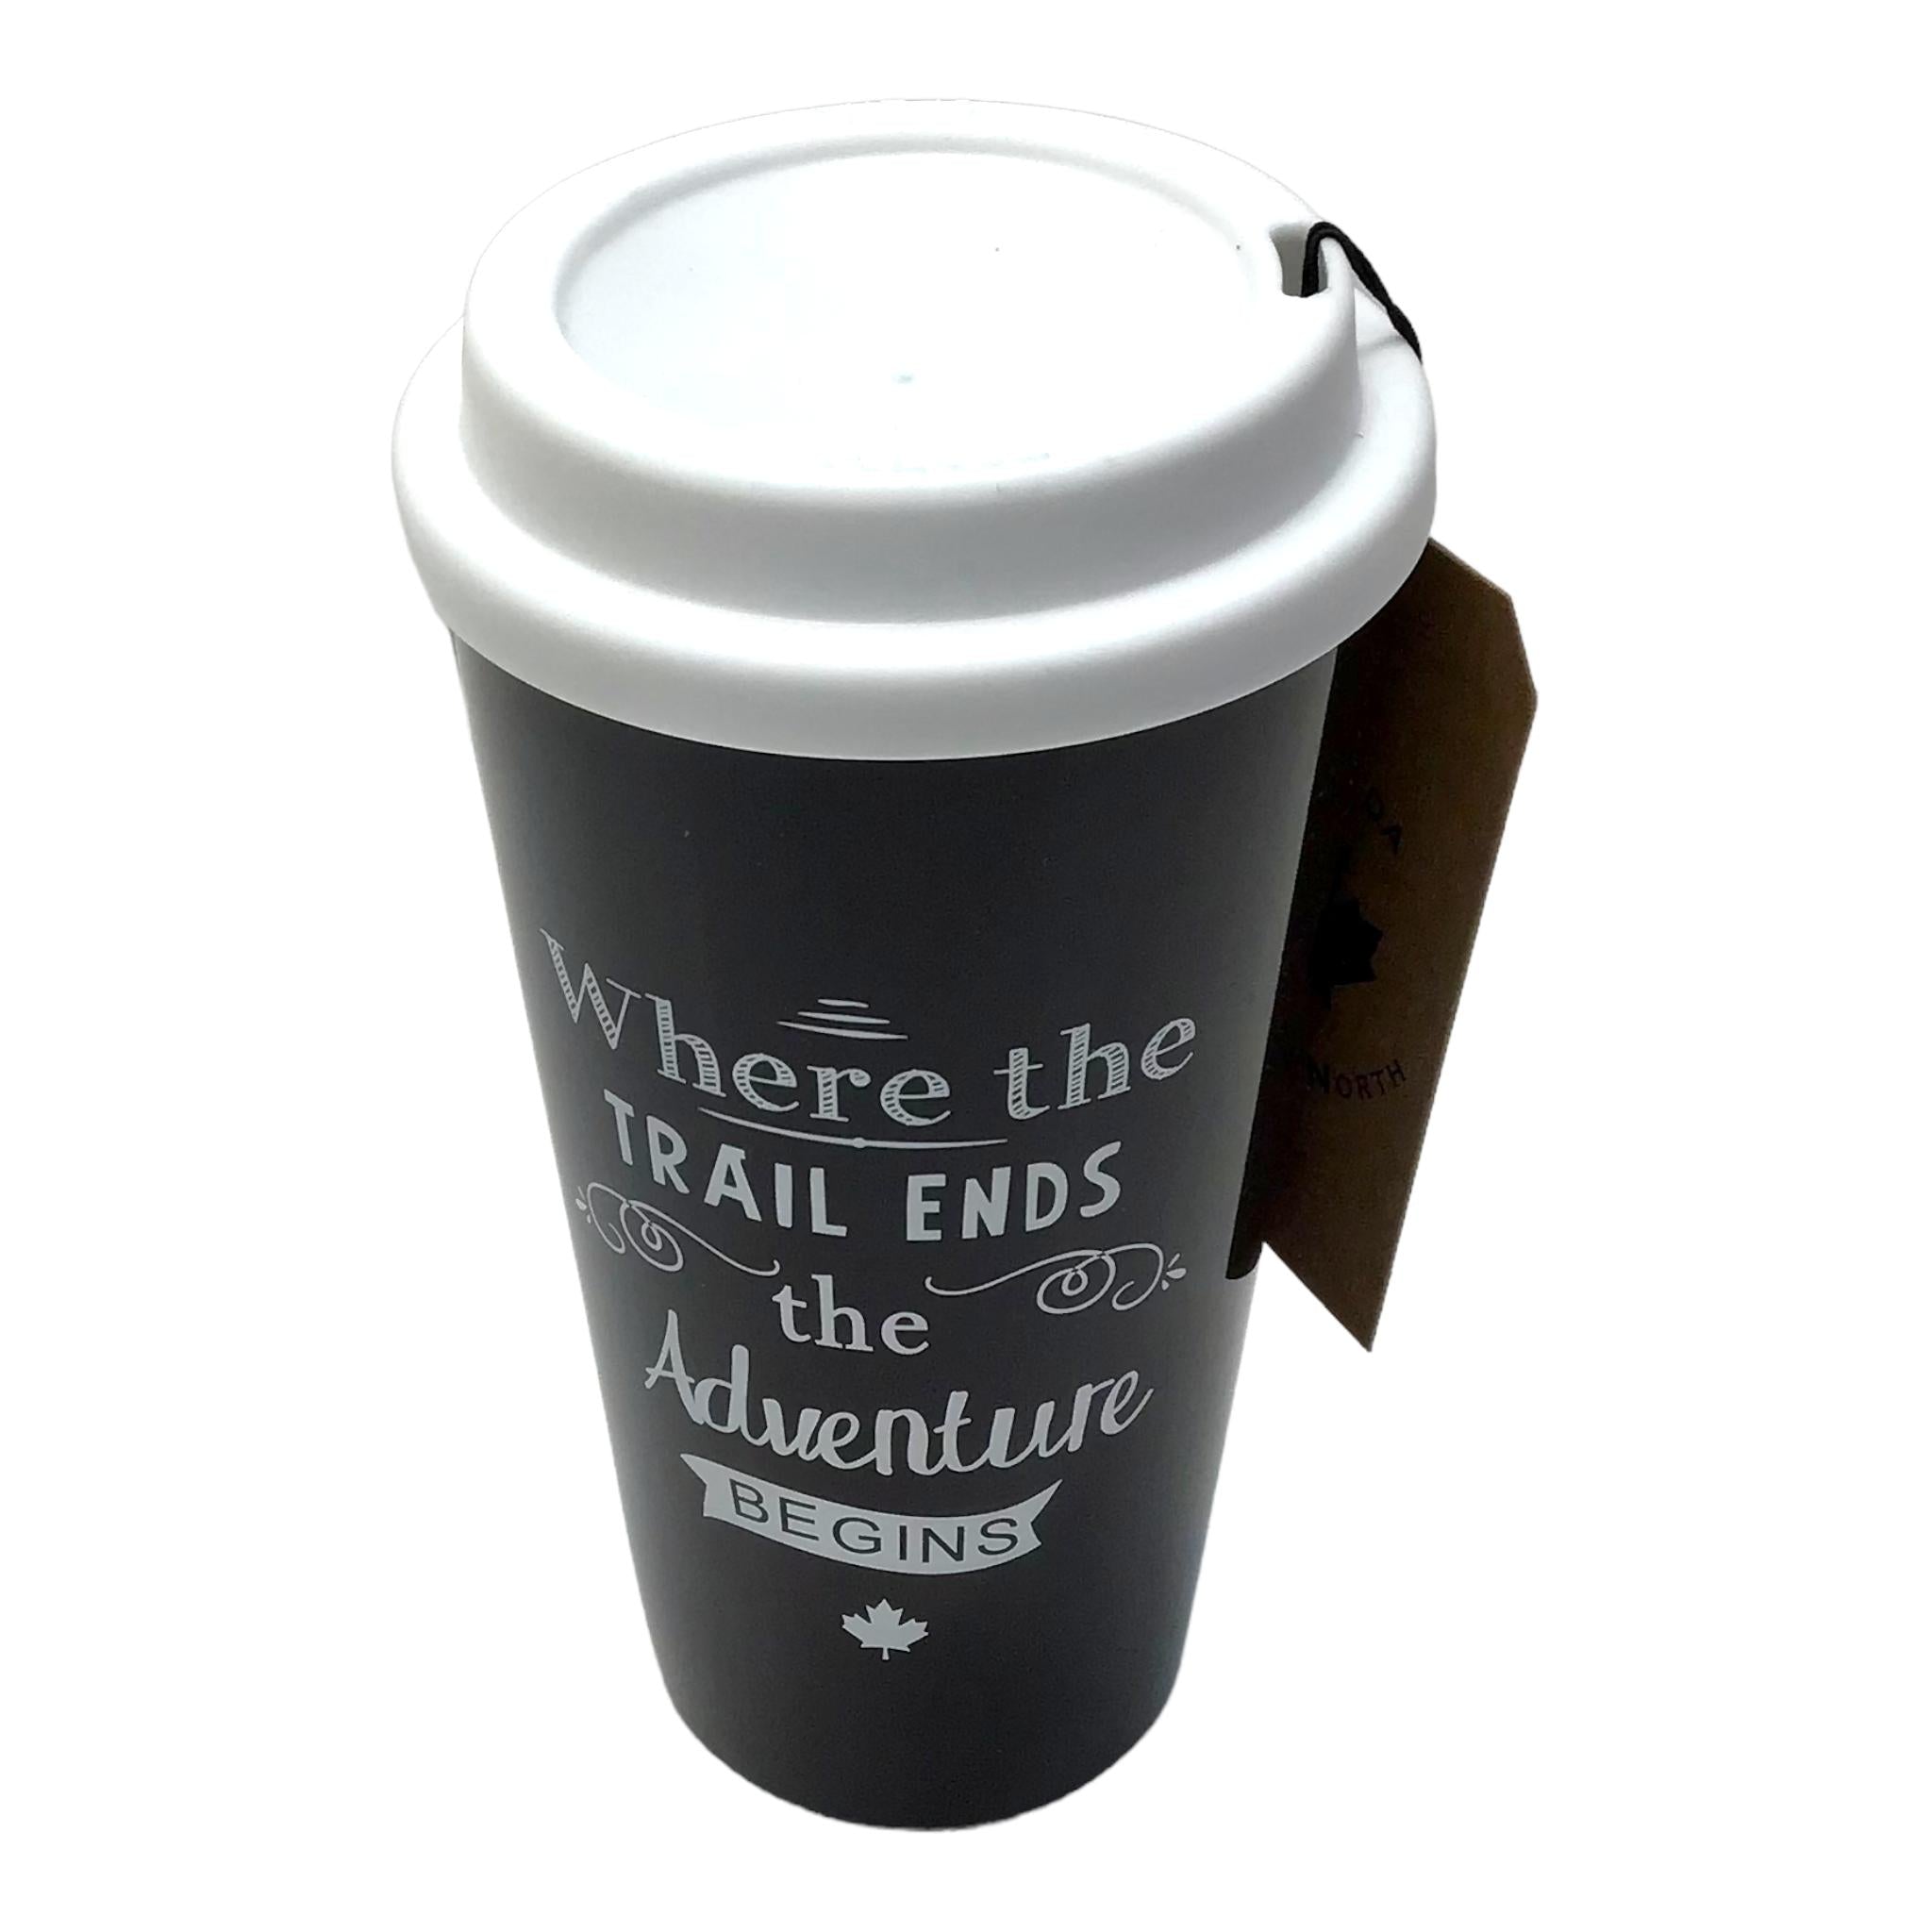 Take It to Go with Lids Reusable Plastic Canada Travel Cups Mugs, Hot Cold Drinks